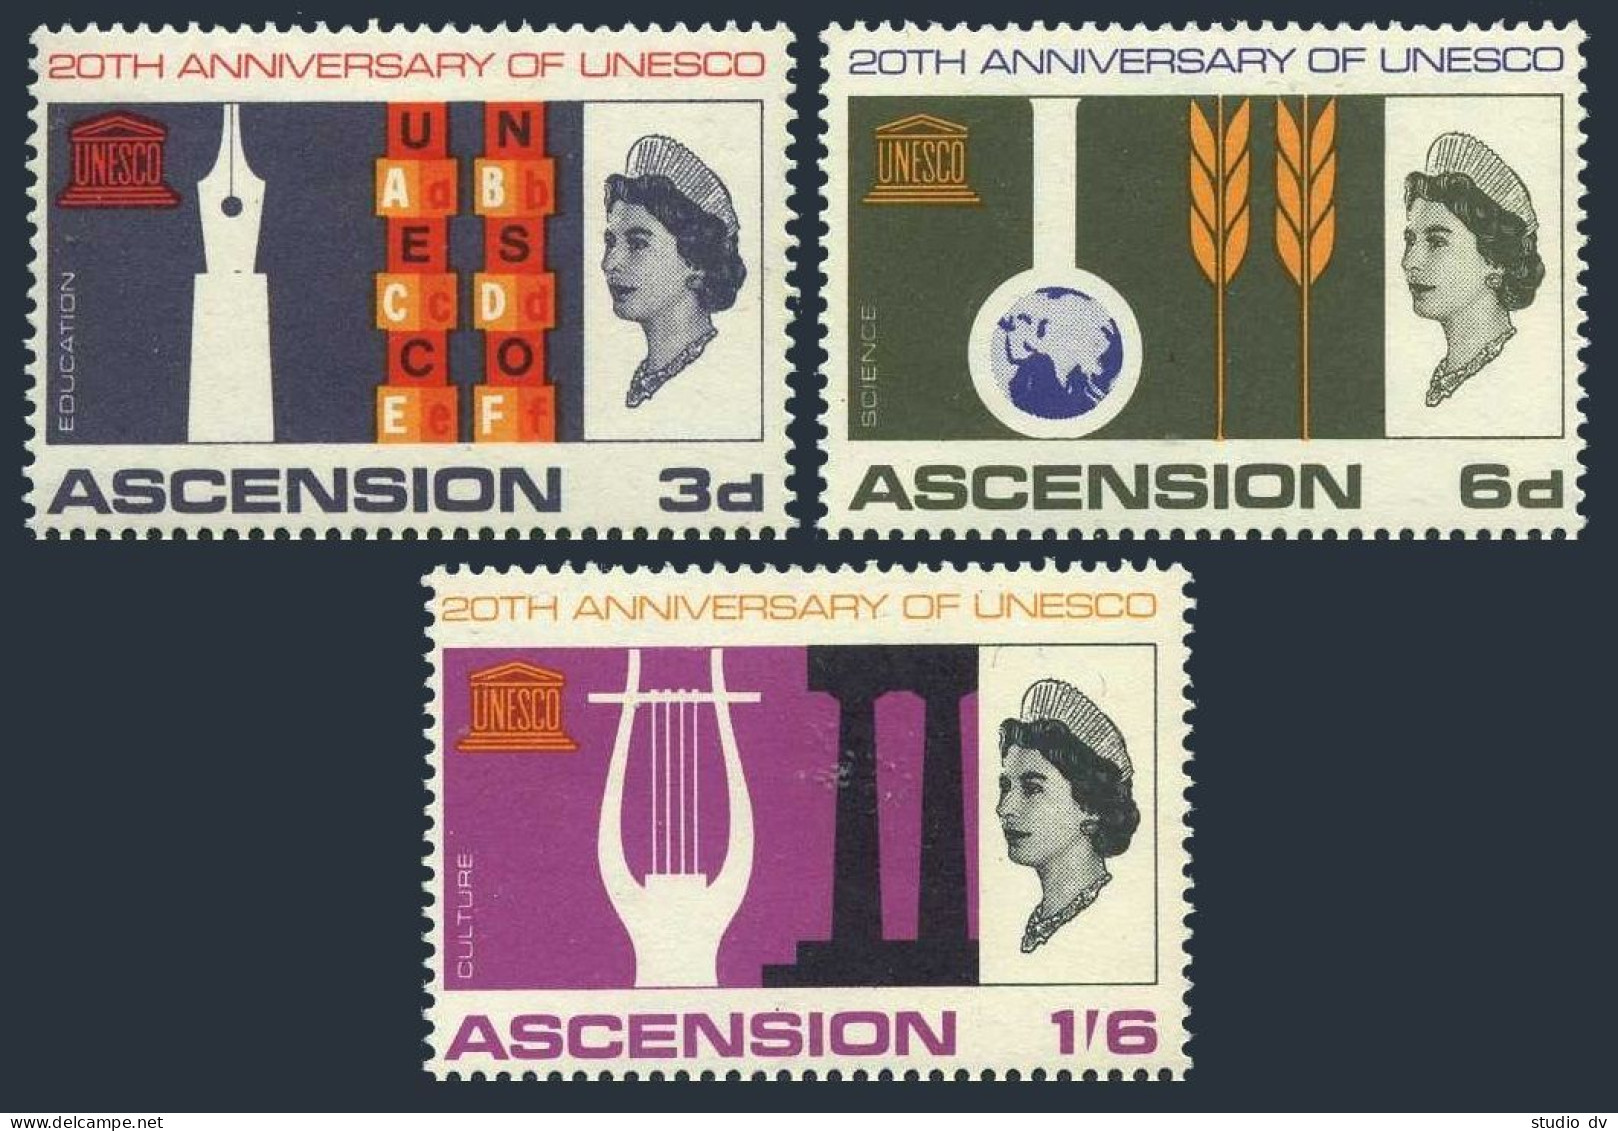 Ascension 108-110, Hinged. UNESCO-20, 1967. Education, Science, Culture. - Ascension